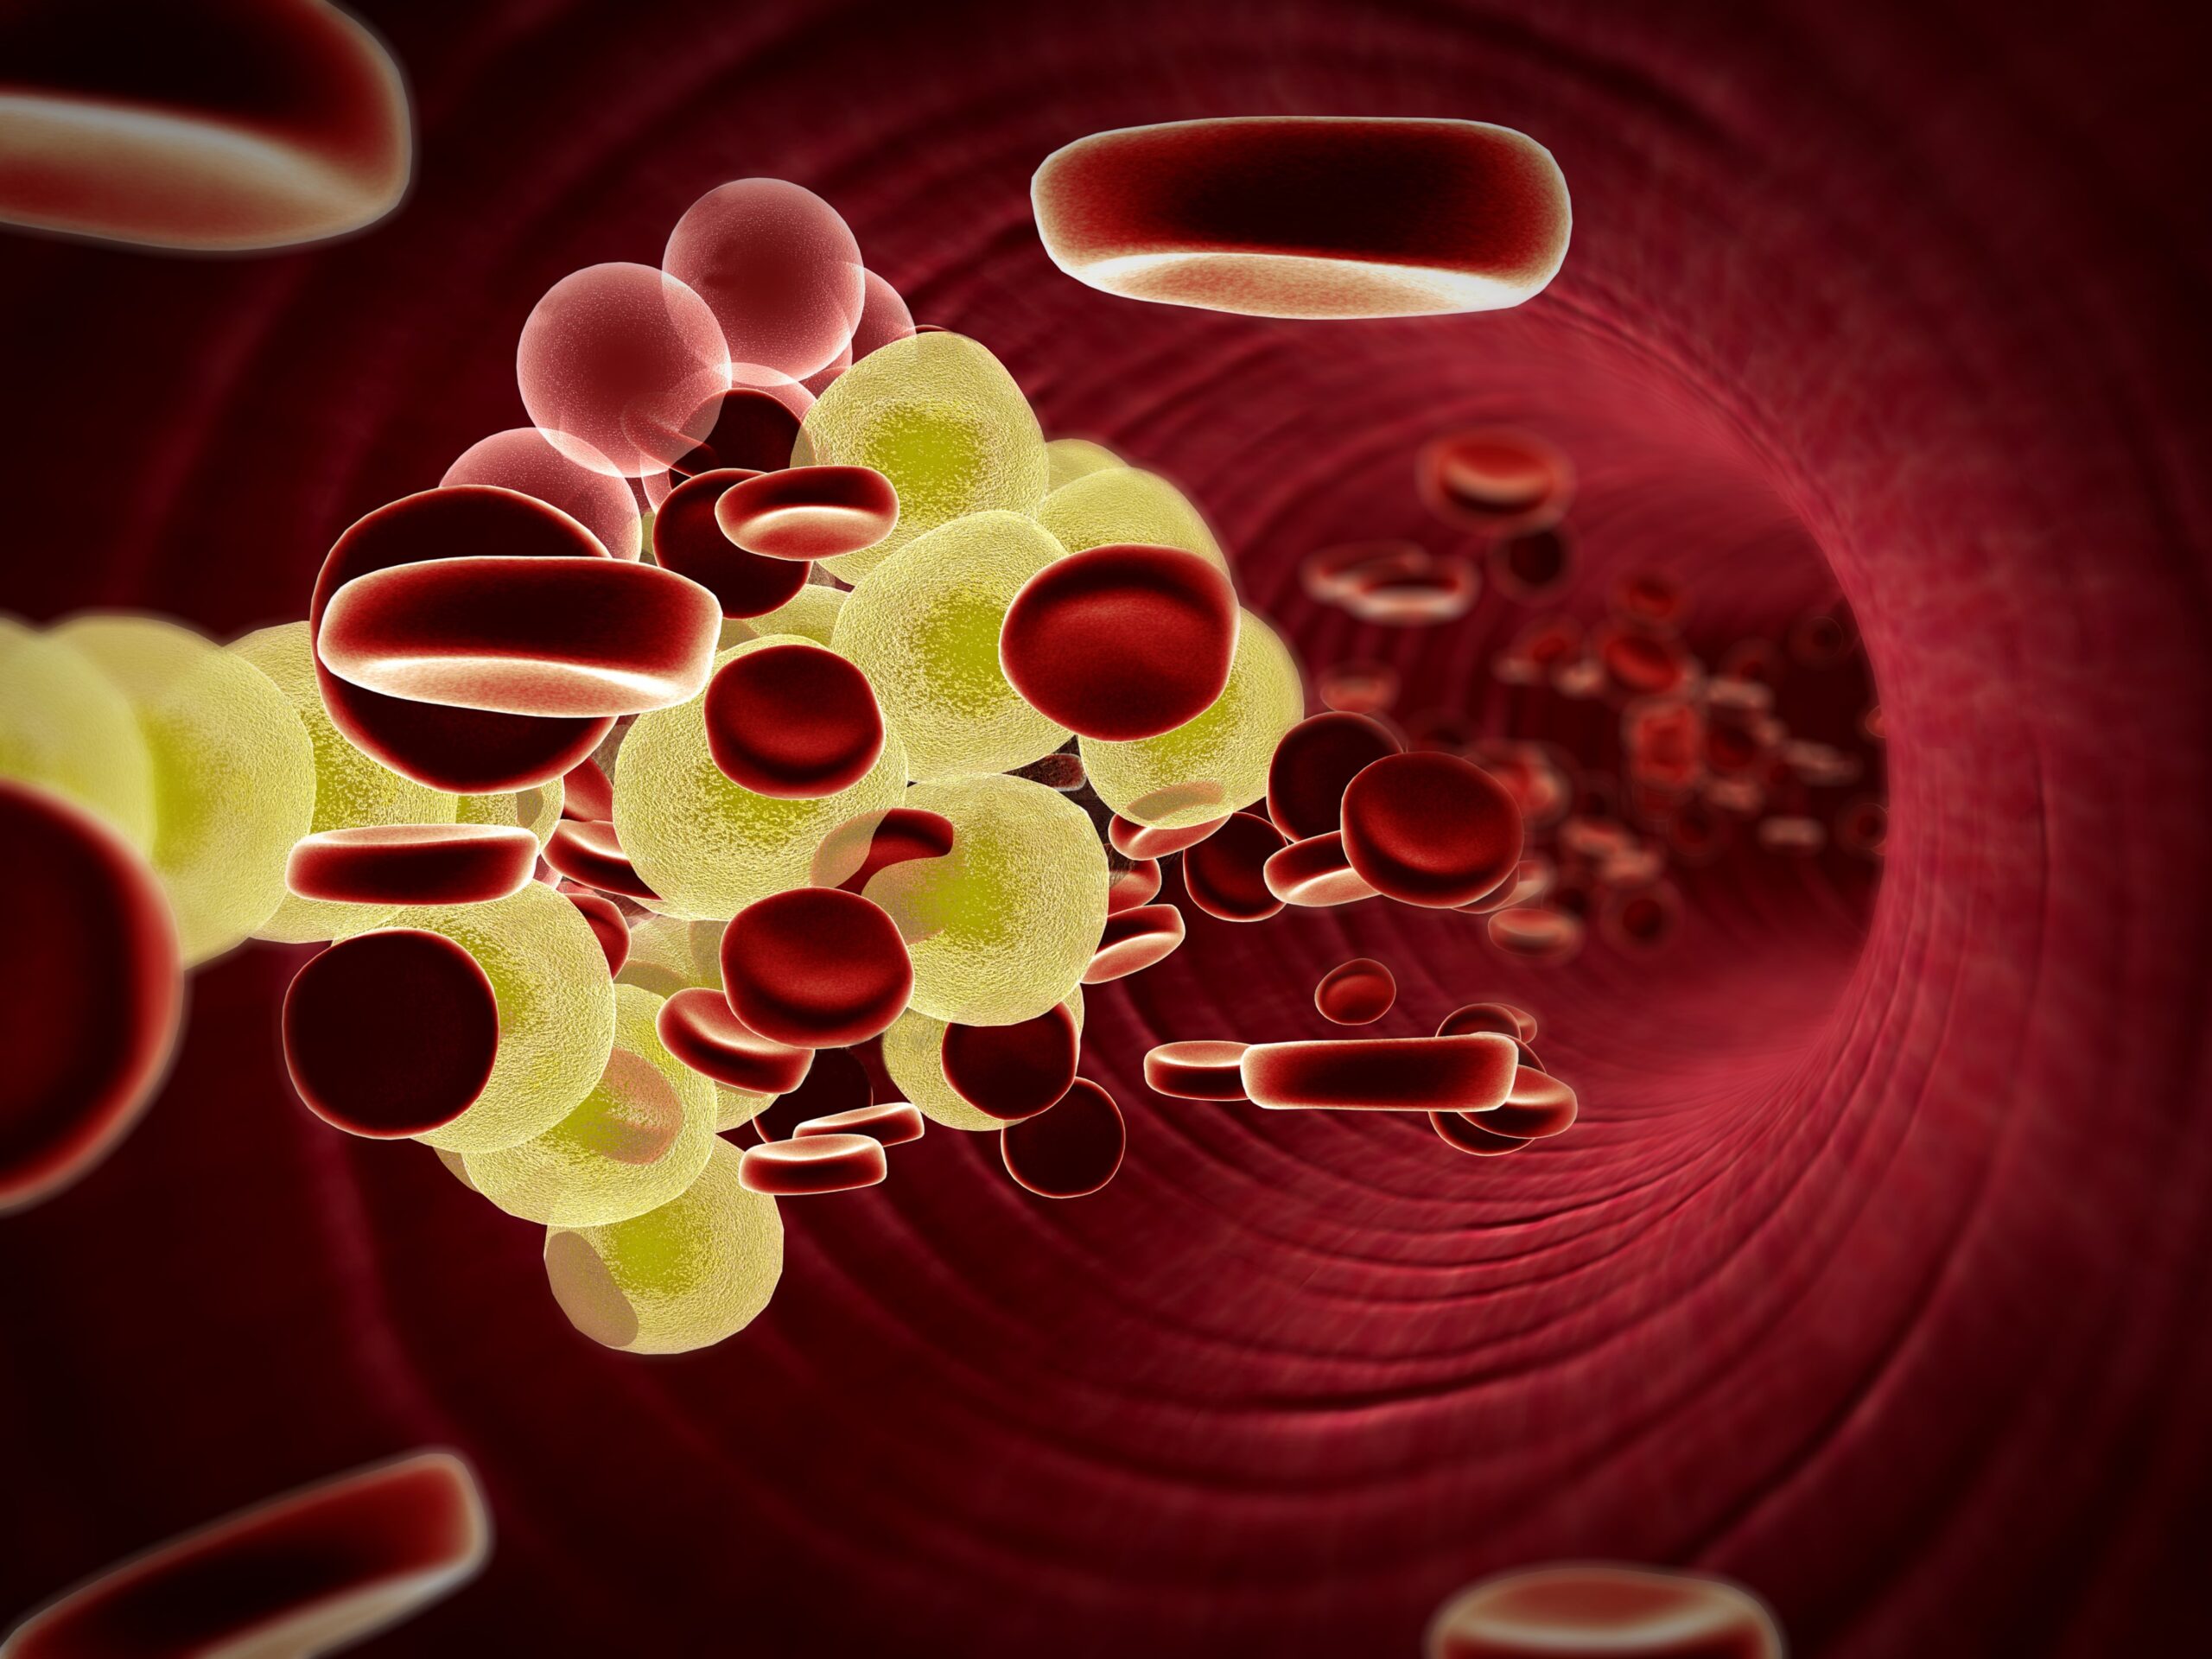 Could Managing Cholesterol Prevent Alzheimer’s?